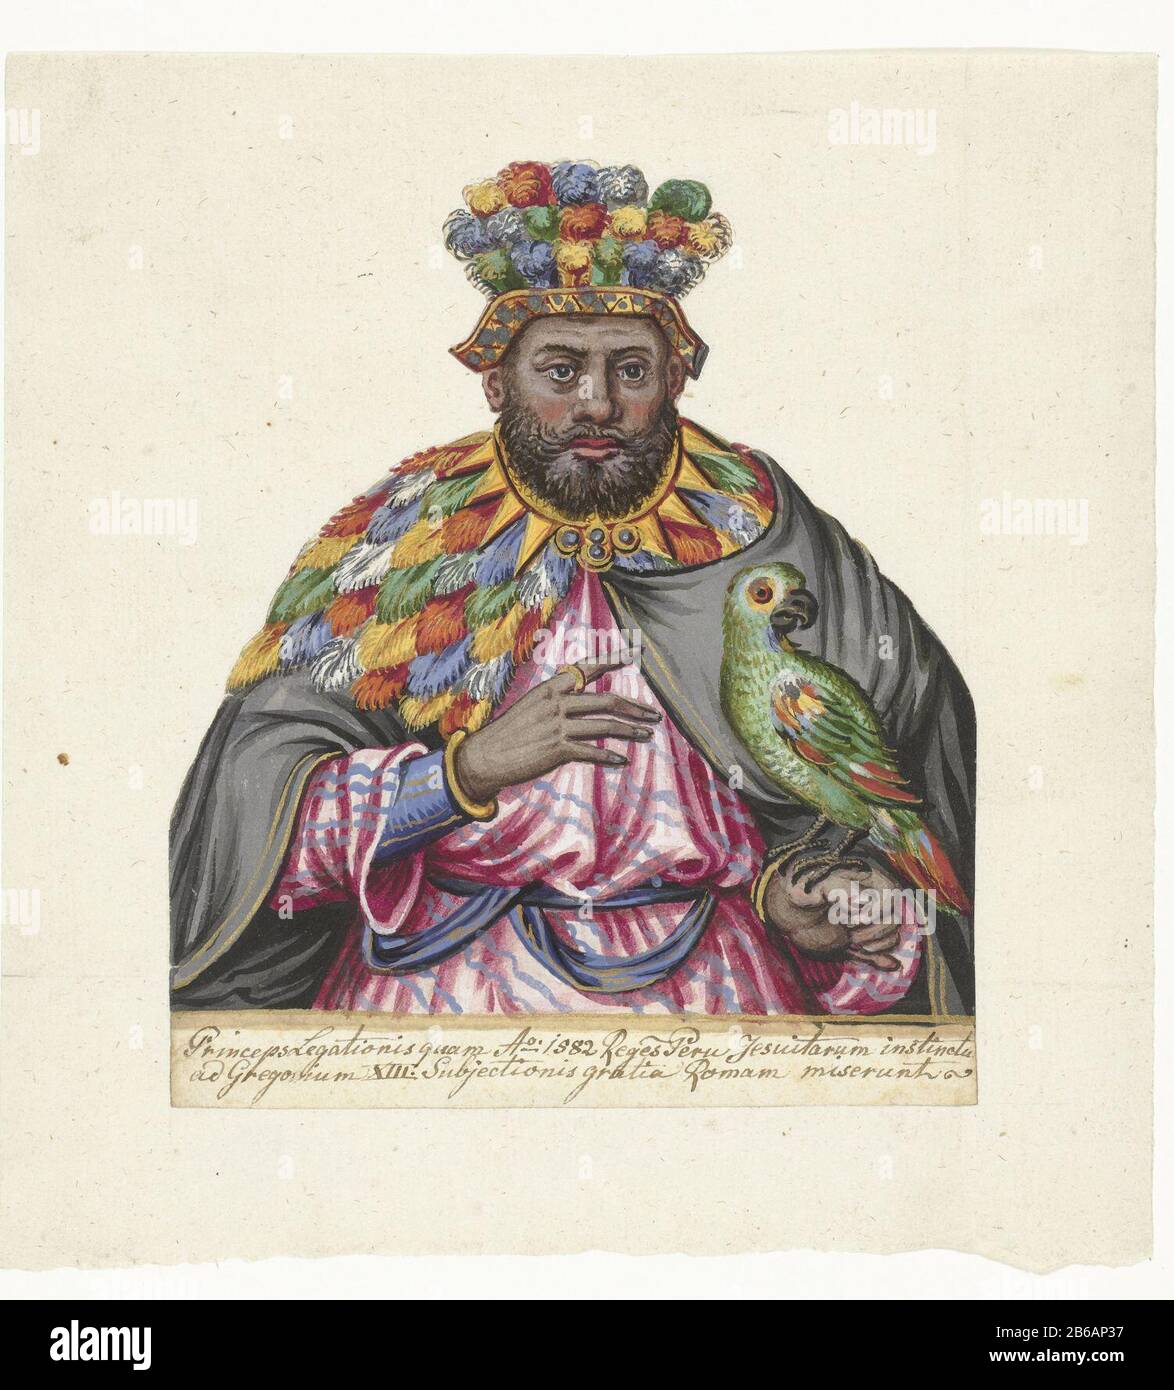 Ambassadeur The ambassador from the King of Peru in 1582 by Pope Gregory XIII sent at the behest of the jezuïeten. Manufacturer : artist: Lukas Sir Date : 1582 - 1584 Physical characteristics: gouache and gold paint material: paper gold paint gouache (water) Measurements: h 141 mm × W 120 mm Stock Photo